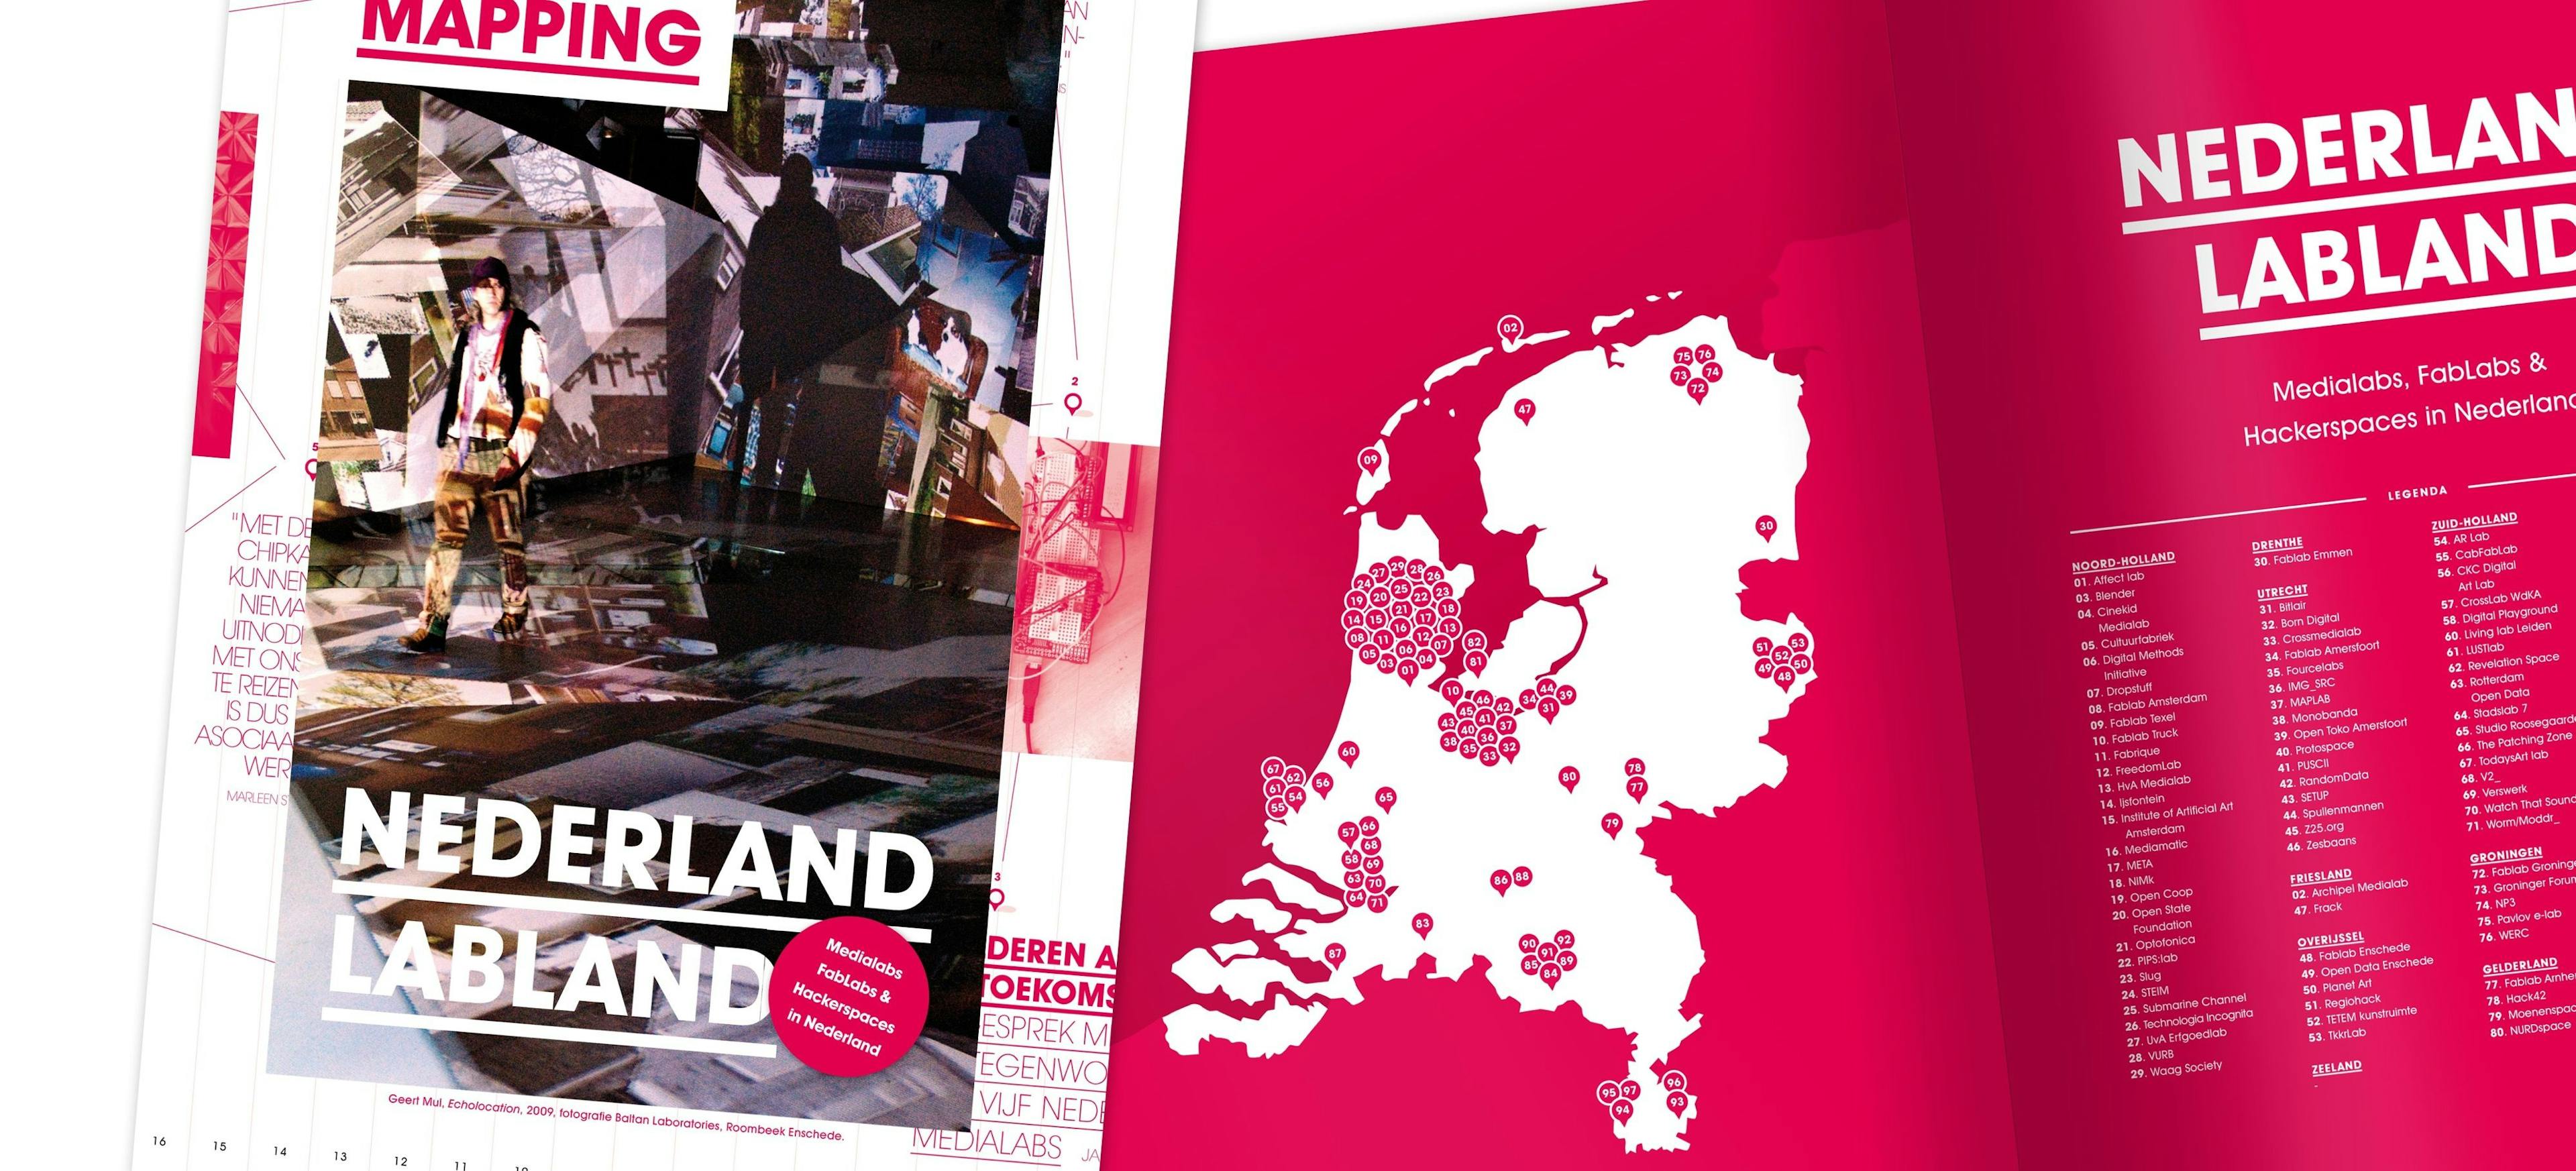  Nederland Labland: Medialabs, Fablabs and Hackerspaces 